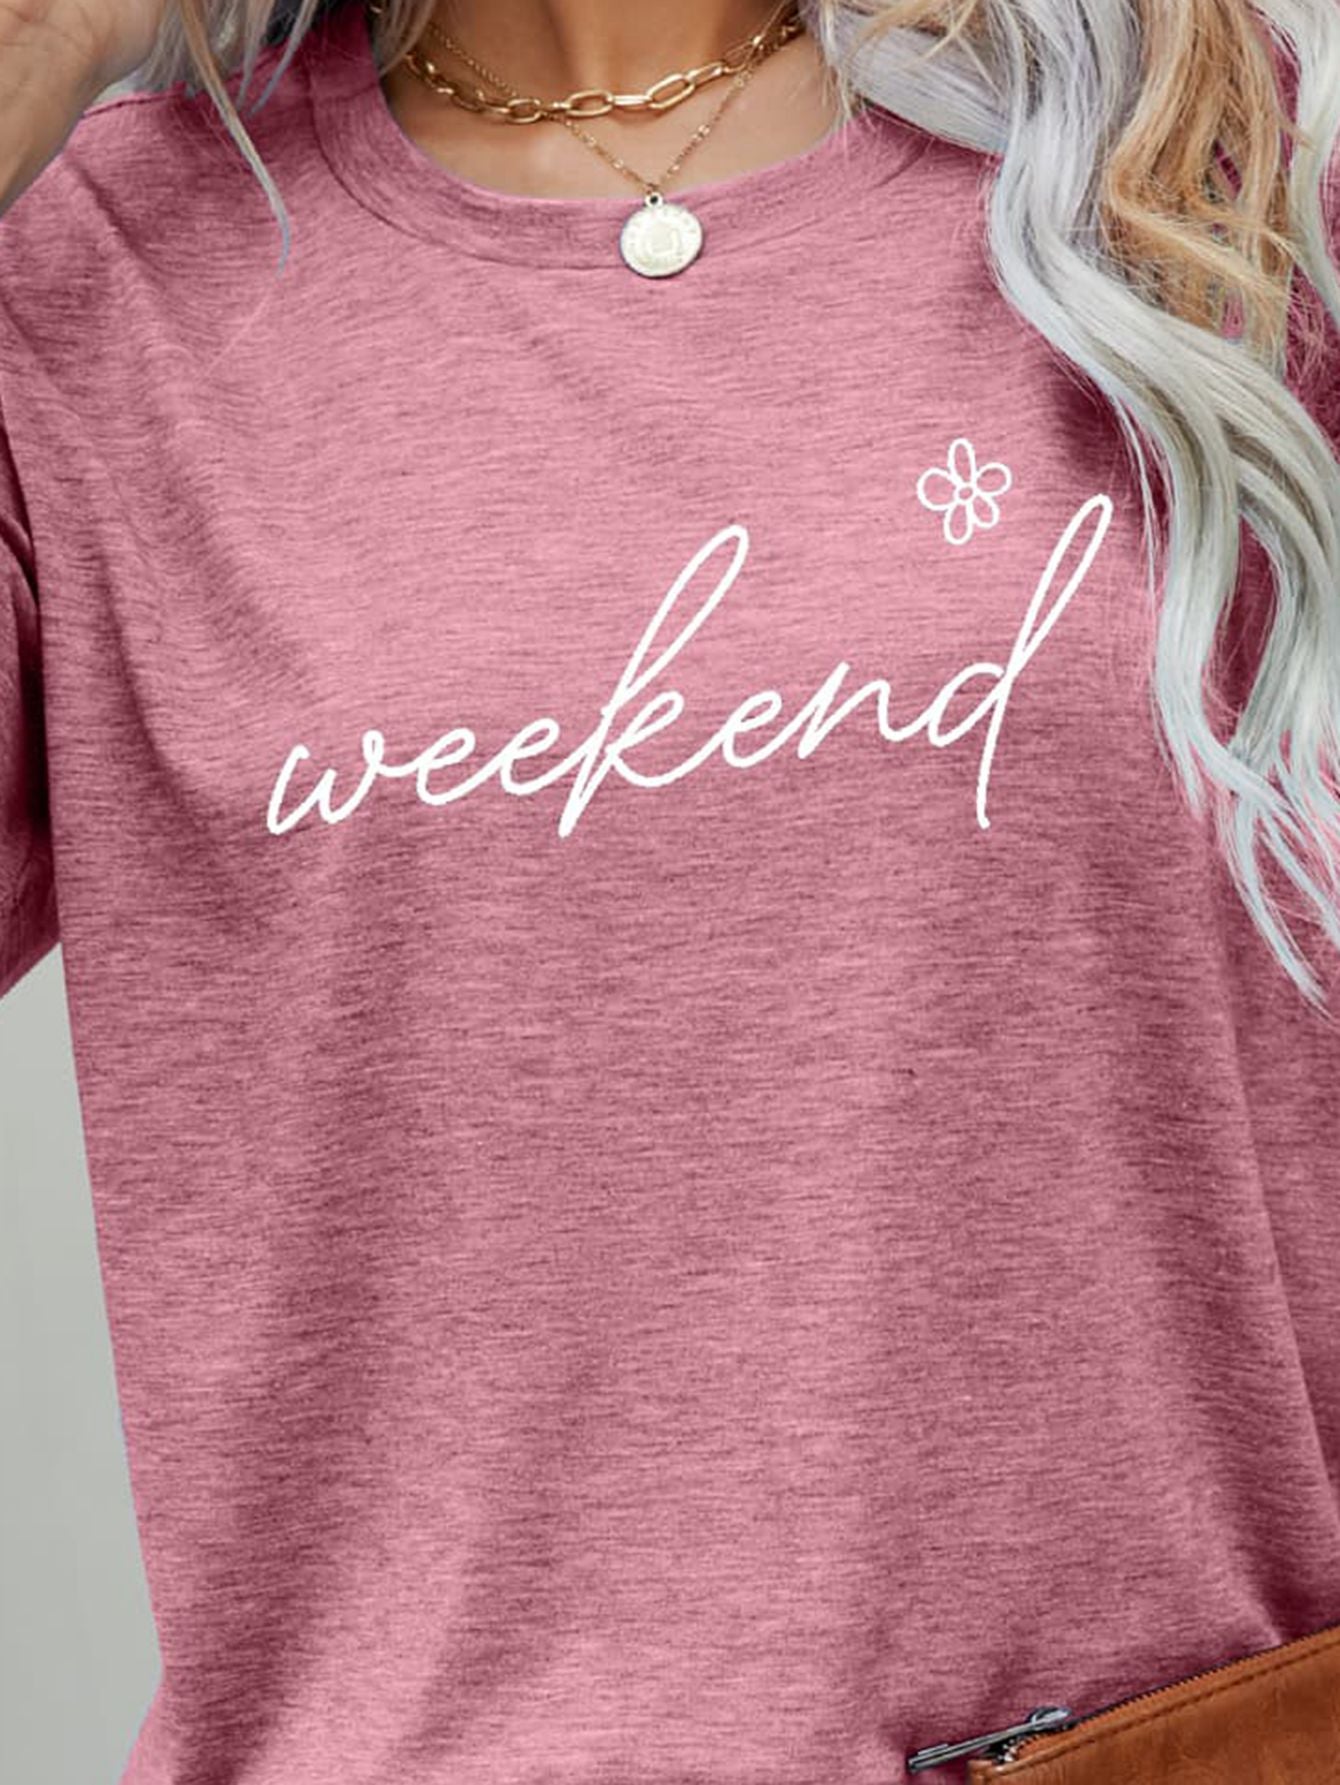 WEEKEND Flower Graphic Short Sleeve Tee - T-Shirts - Shirts & Tops - 15 - 2024